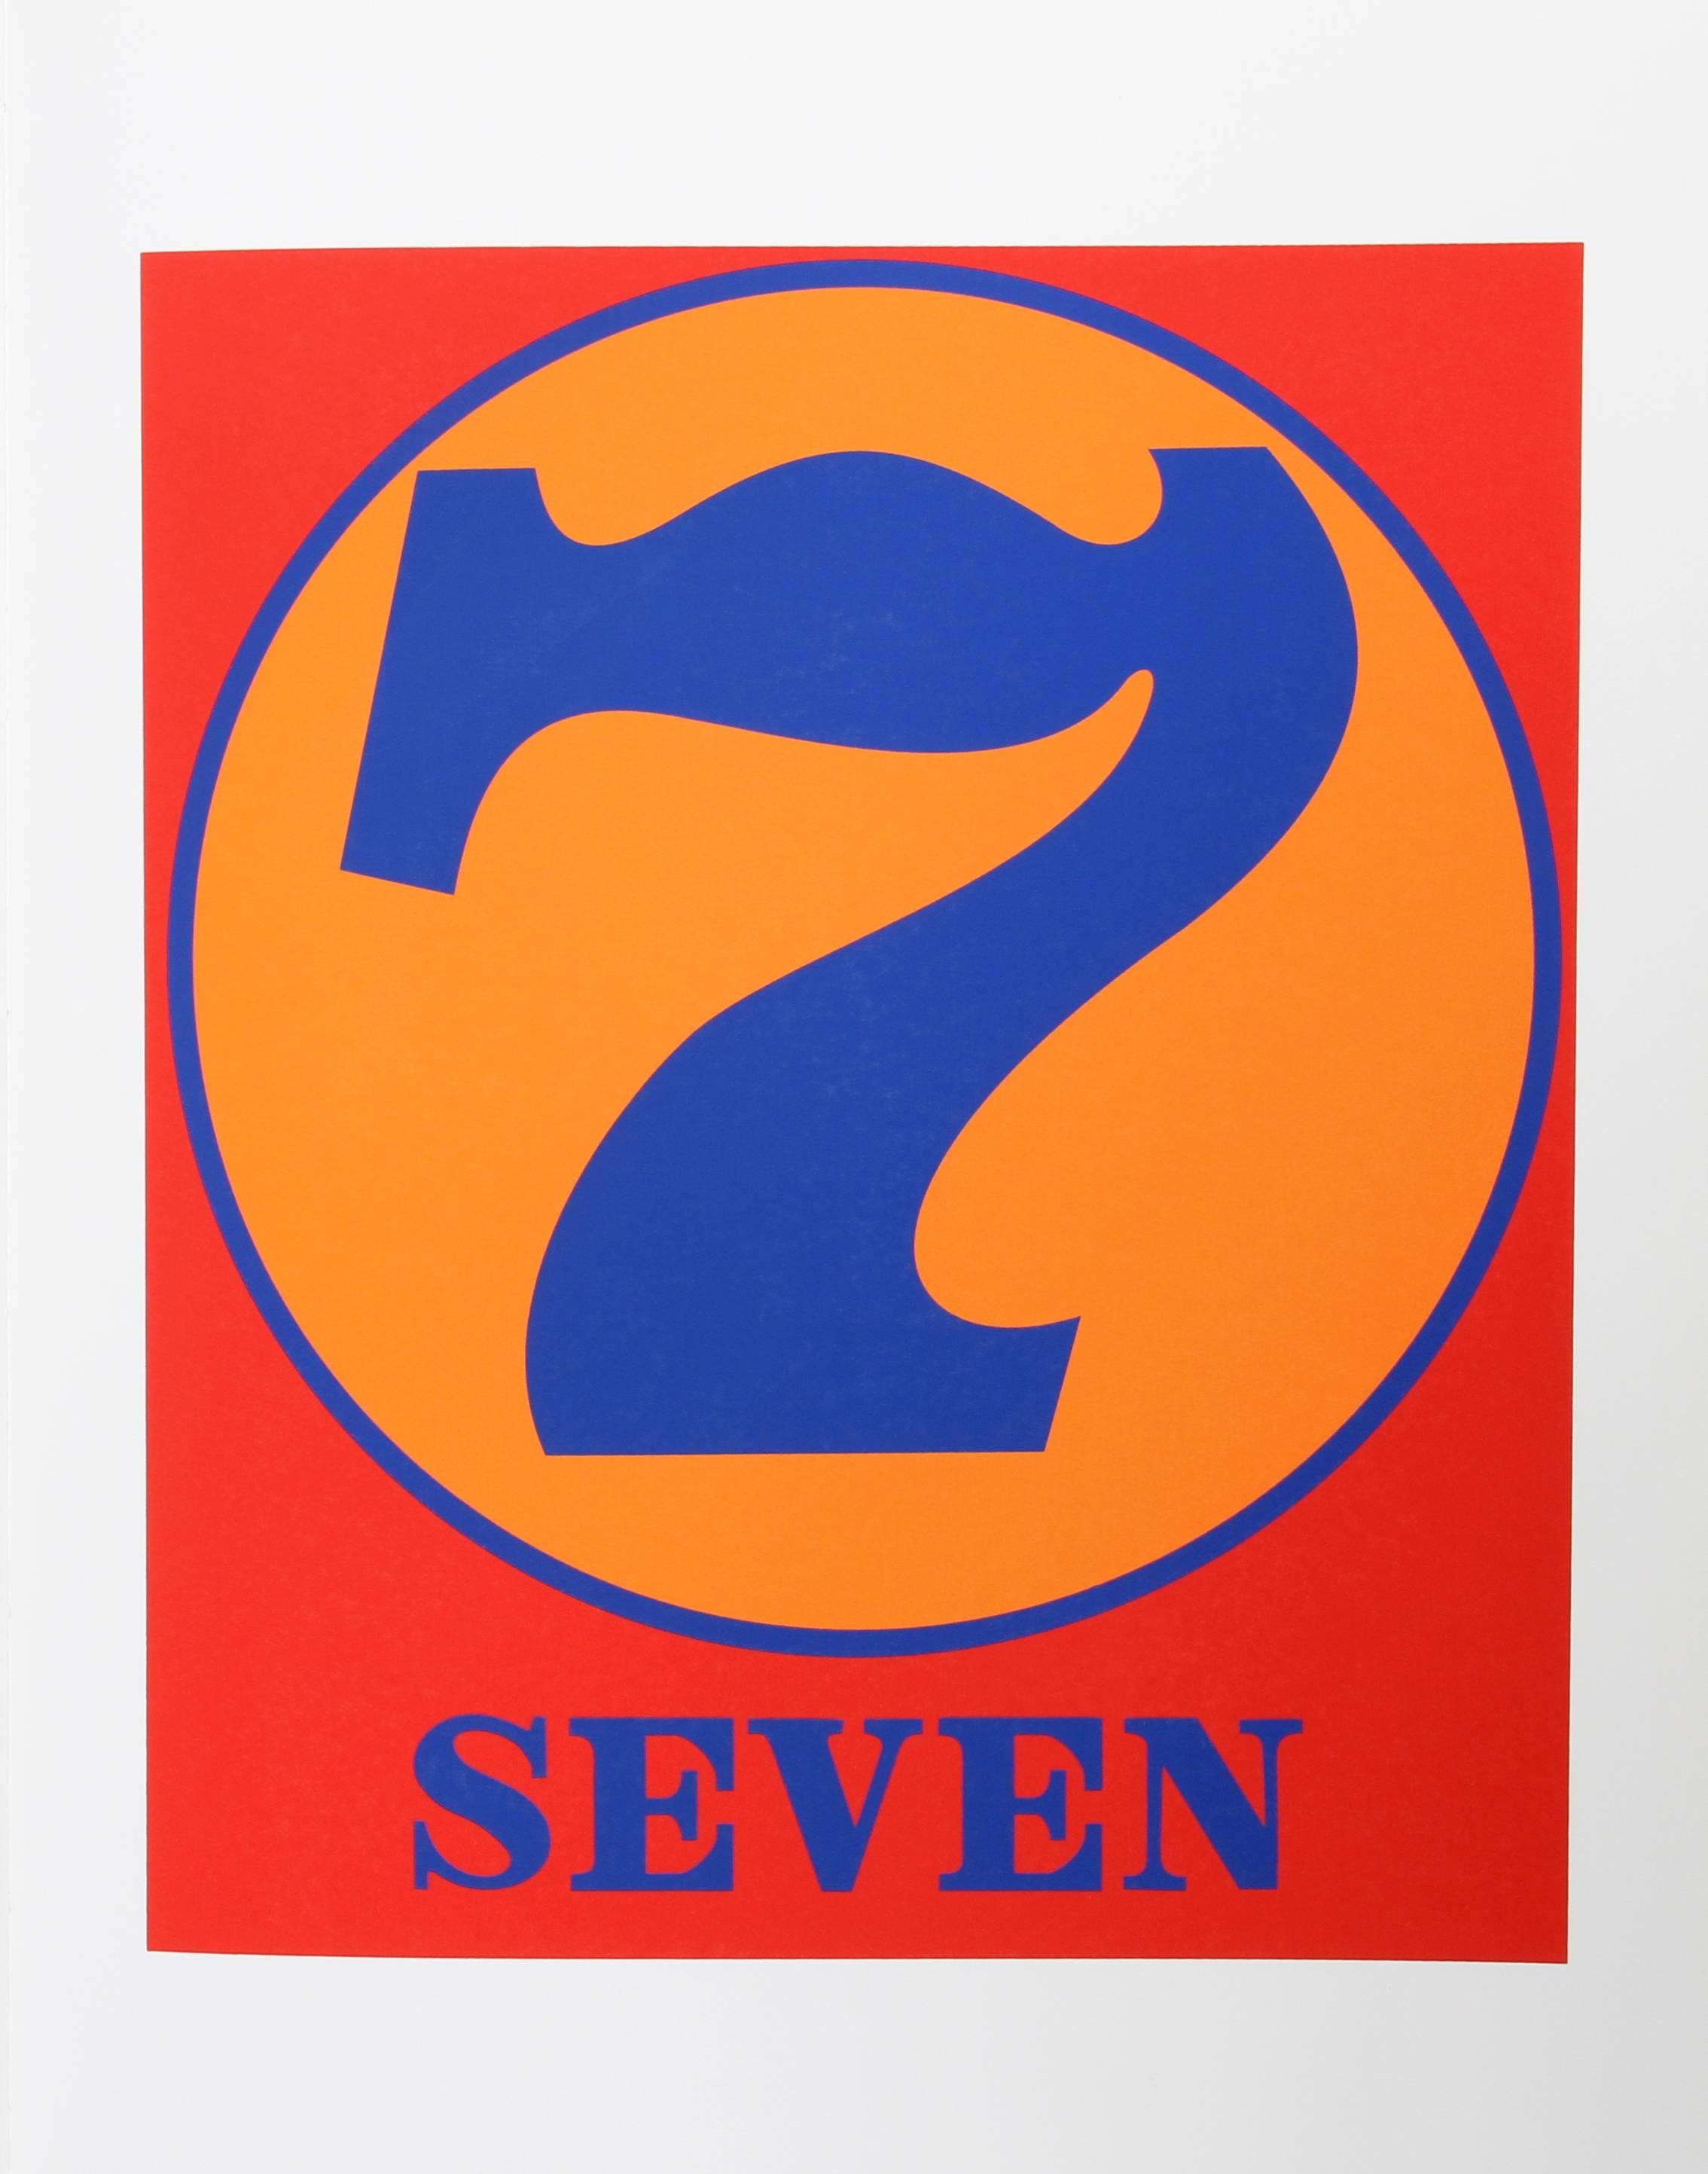 Artist: Robert Indiana, American (1928 - 2018)
Title: Number 7 from the American Dream Portfolio
Year: 1968 (1997)
Medium: Serigraph
Edition Size: 395
Image Size: 16.75 x 14 inches
Size: 22 in. x 17 in. (55.88 cm x 43.18 cm)

Printed and Published